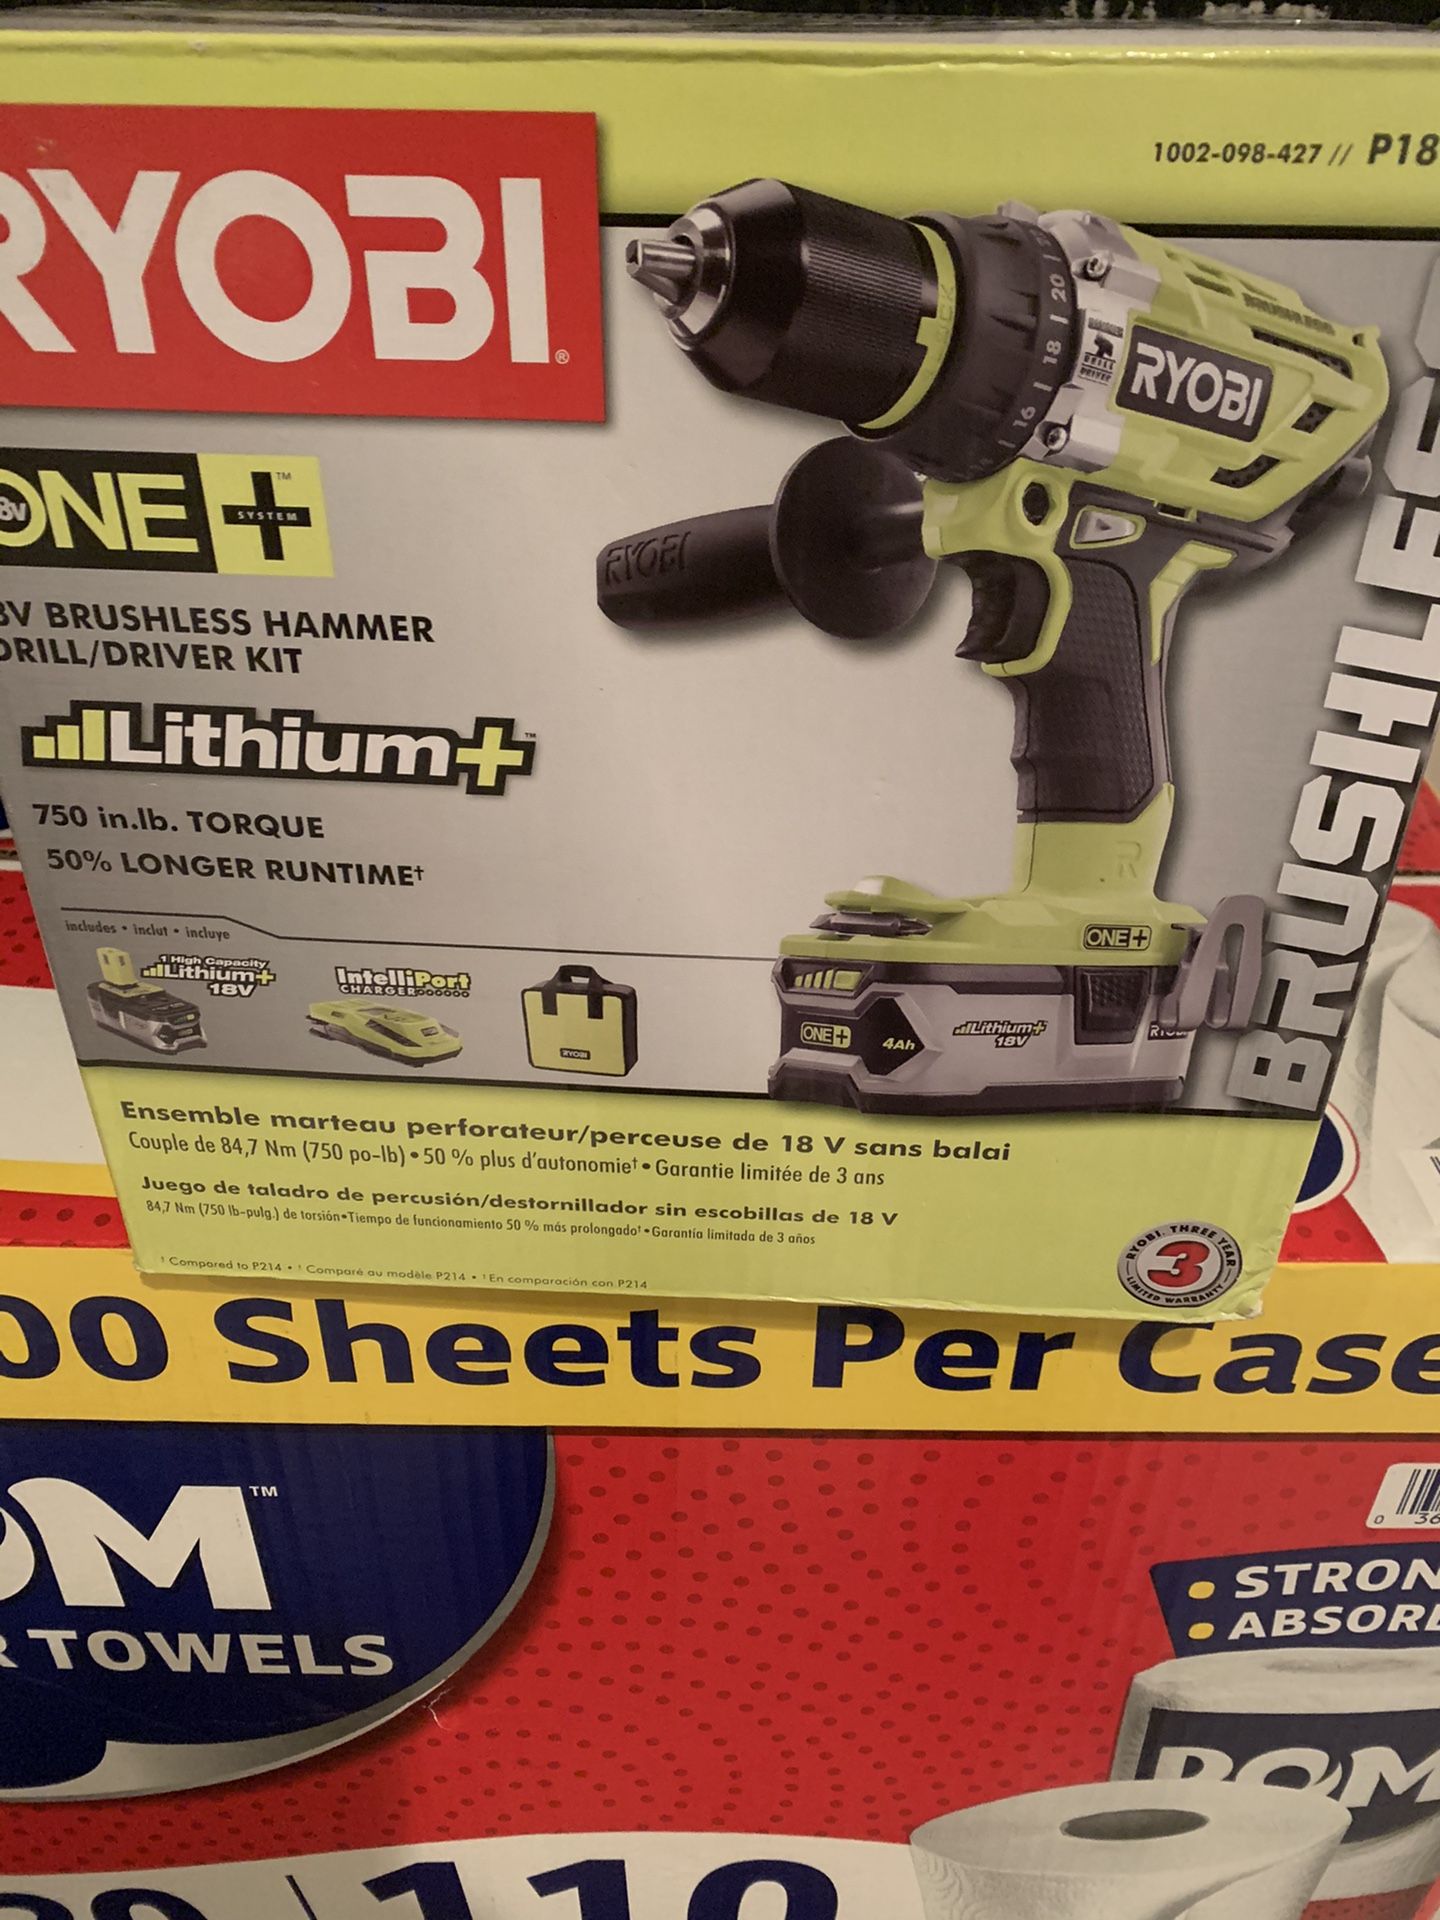 Ryobi 18v One+ Brushless Hammer Drill/driver Kit Brand New With Battery And Charger 